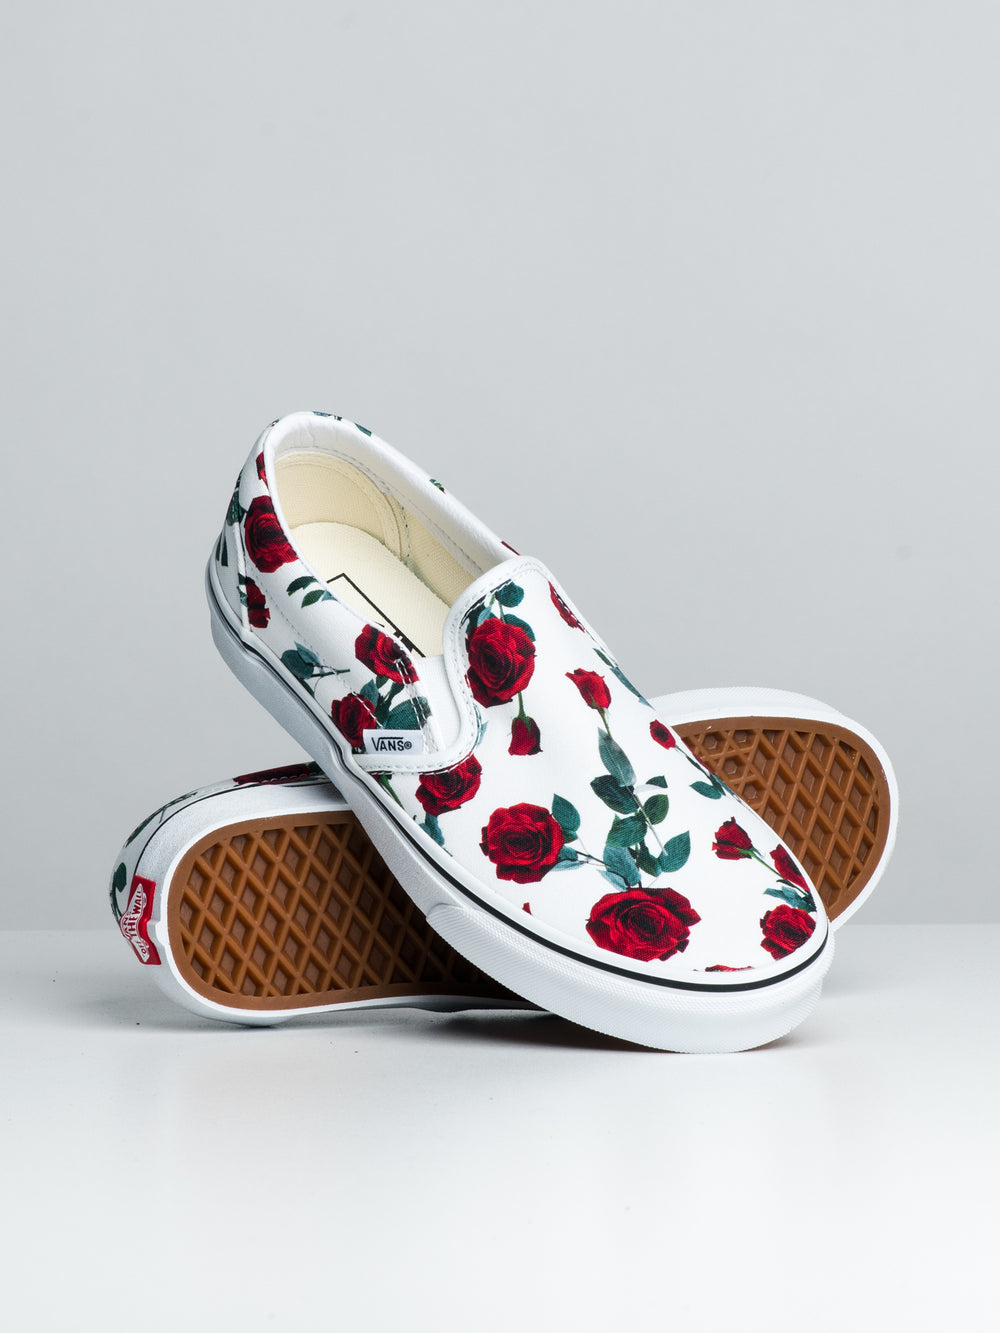 WOMENS VANS CL SLIP ON - RED ROSE/WHITE - CLEARANCE